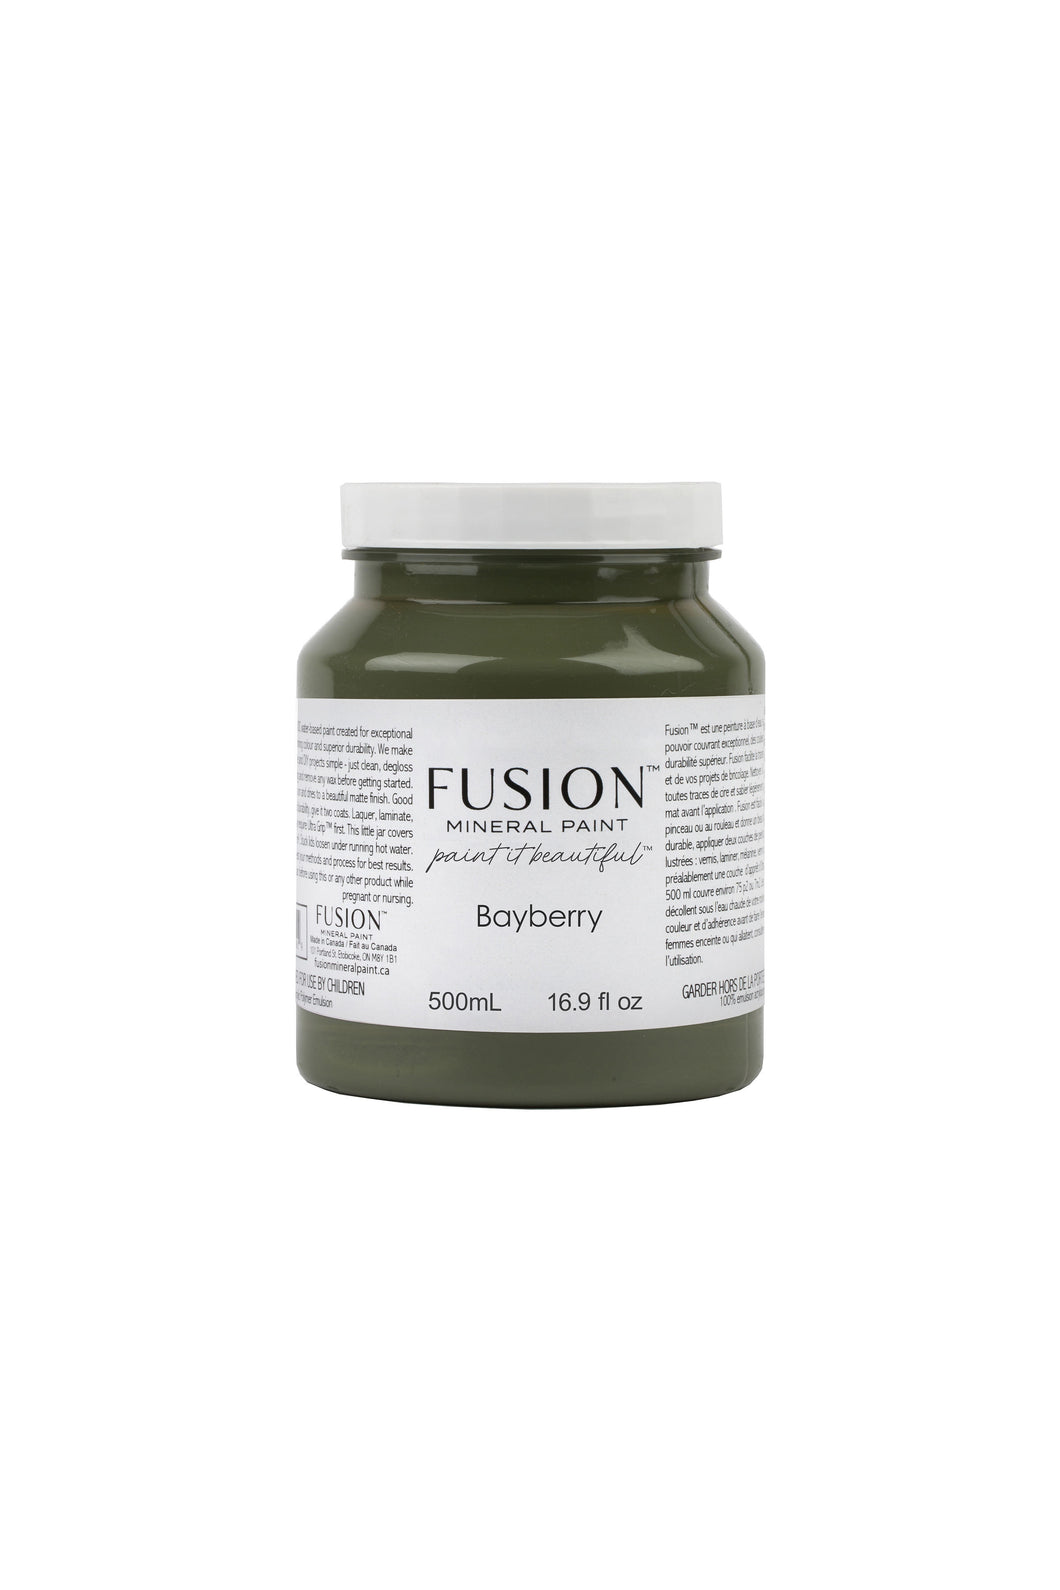 Fusion Mineral Paint Bayberry 500ml